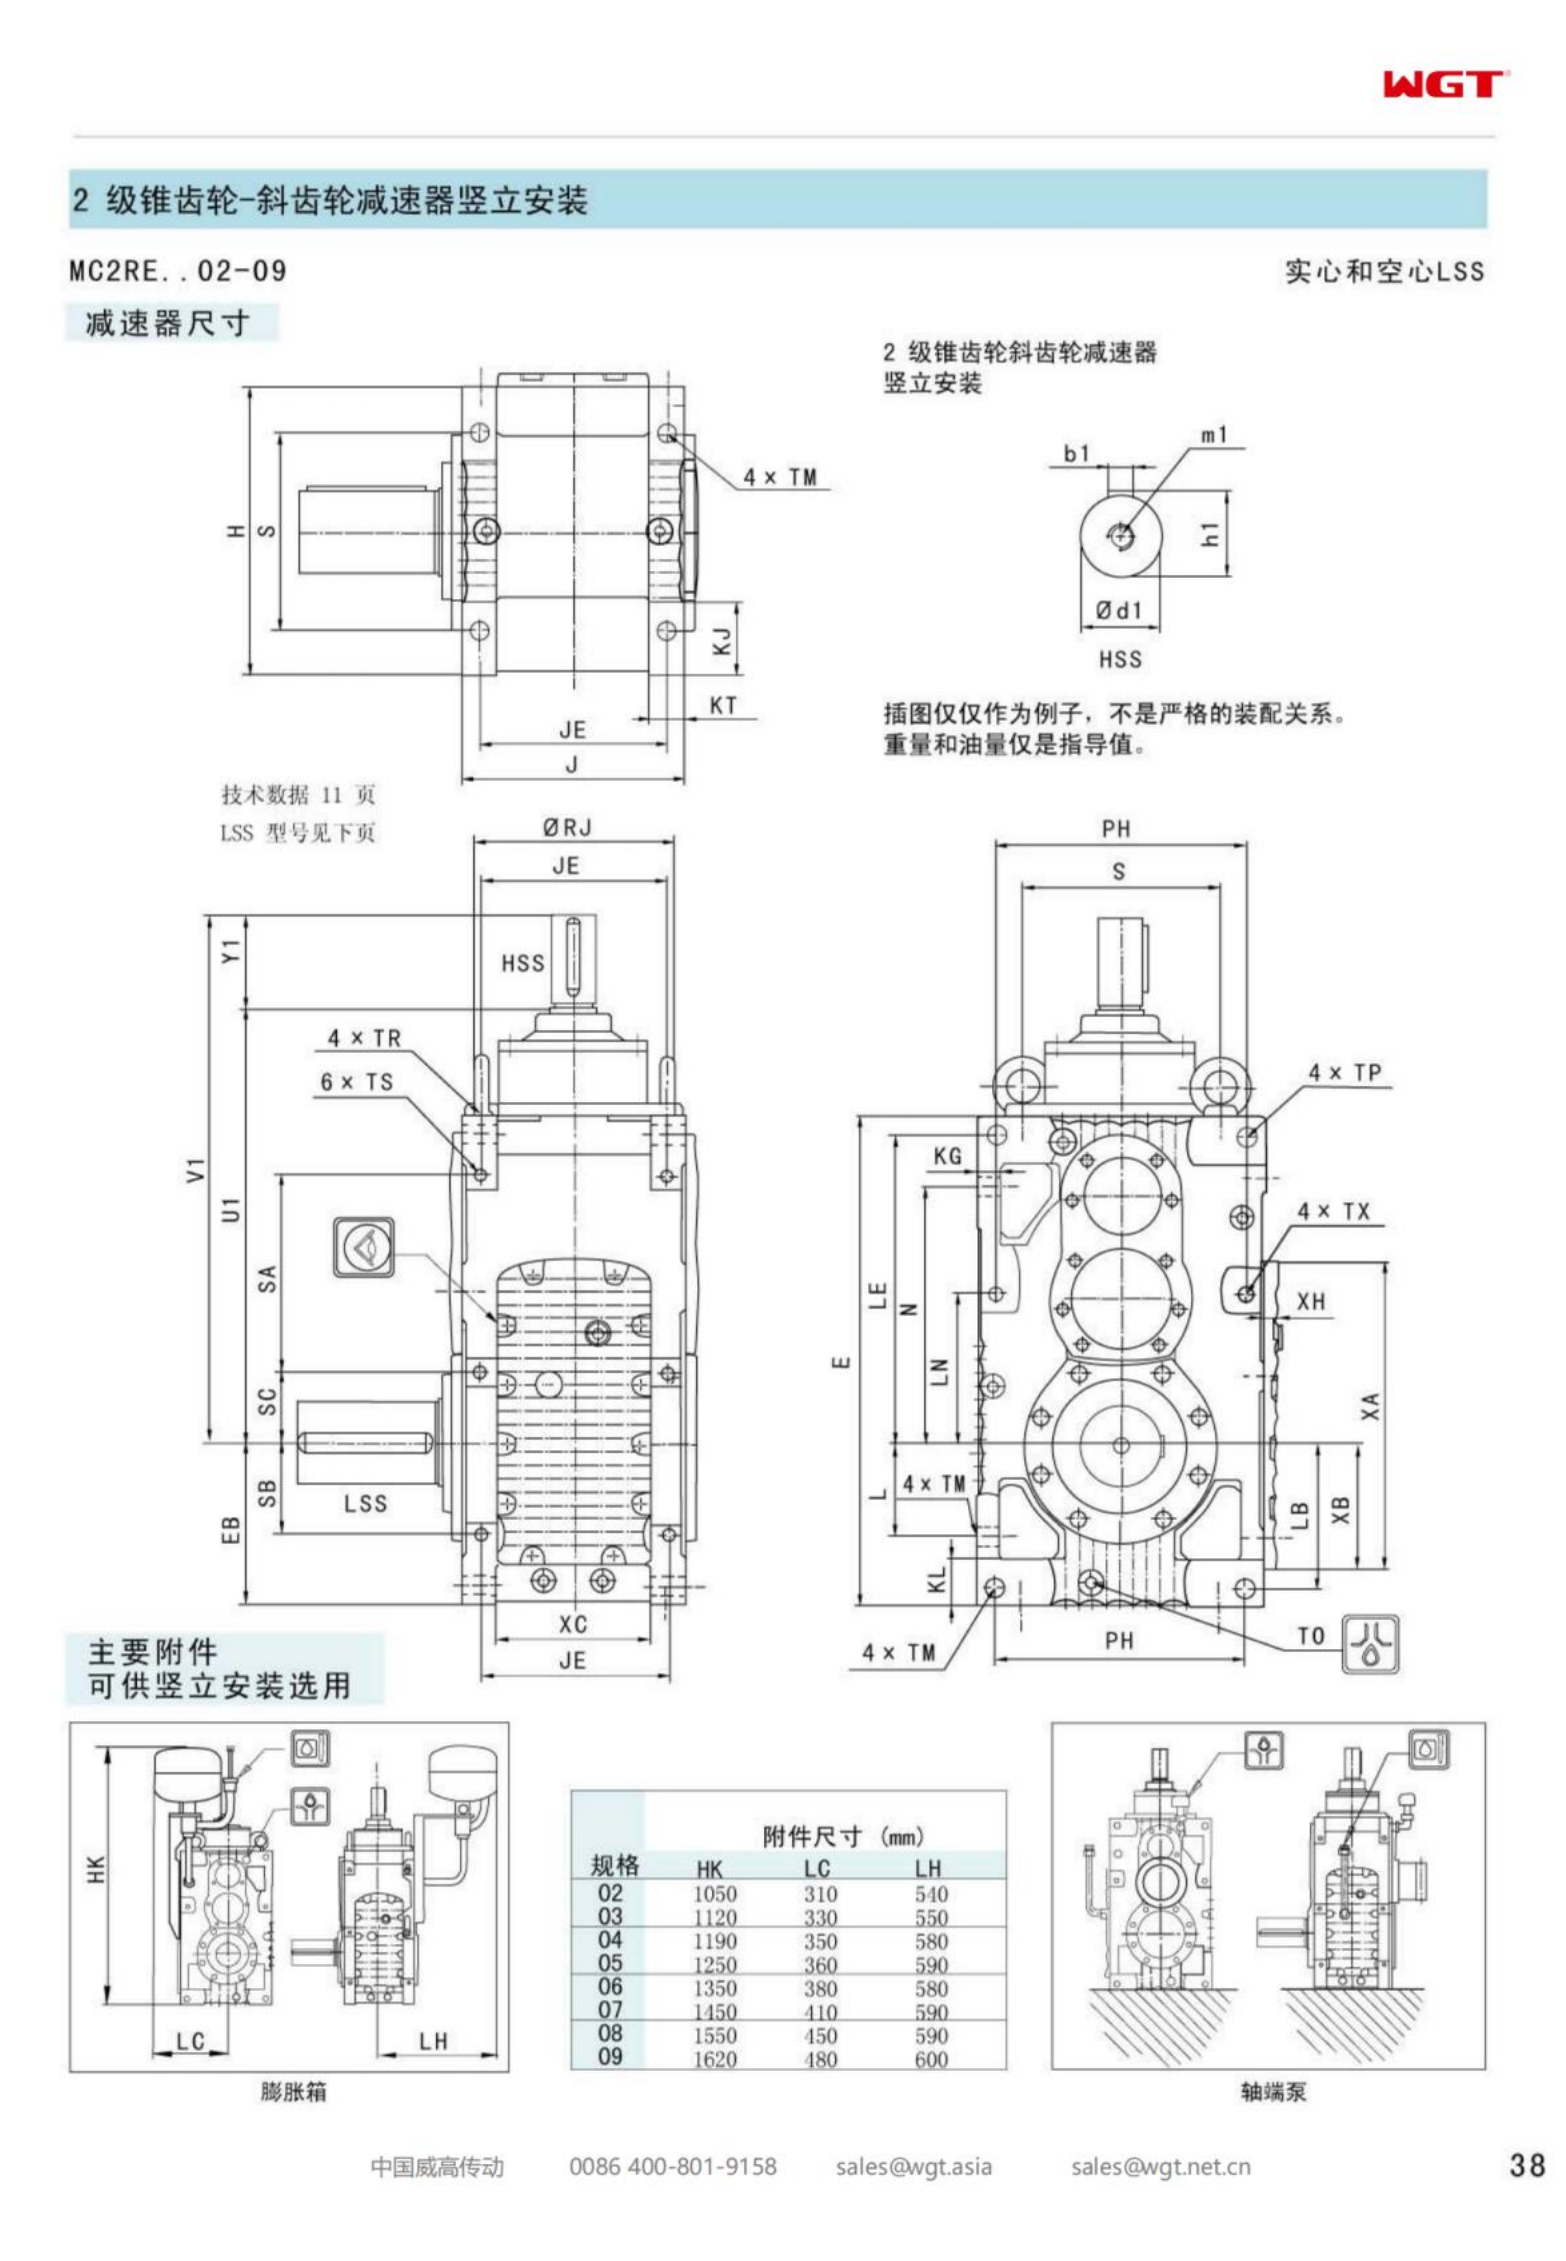 MC2RESF05 Replace_SEW_MC_Series Gearbox